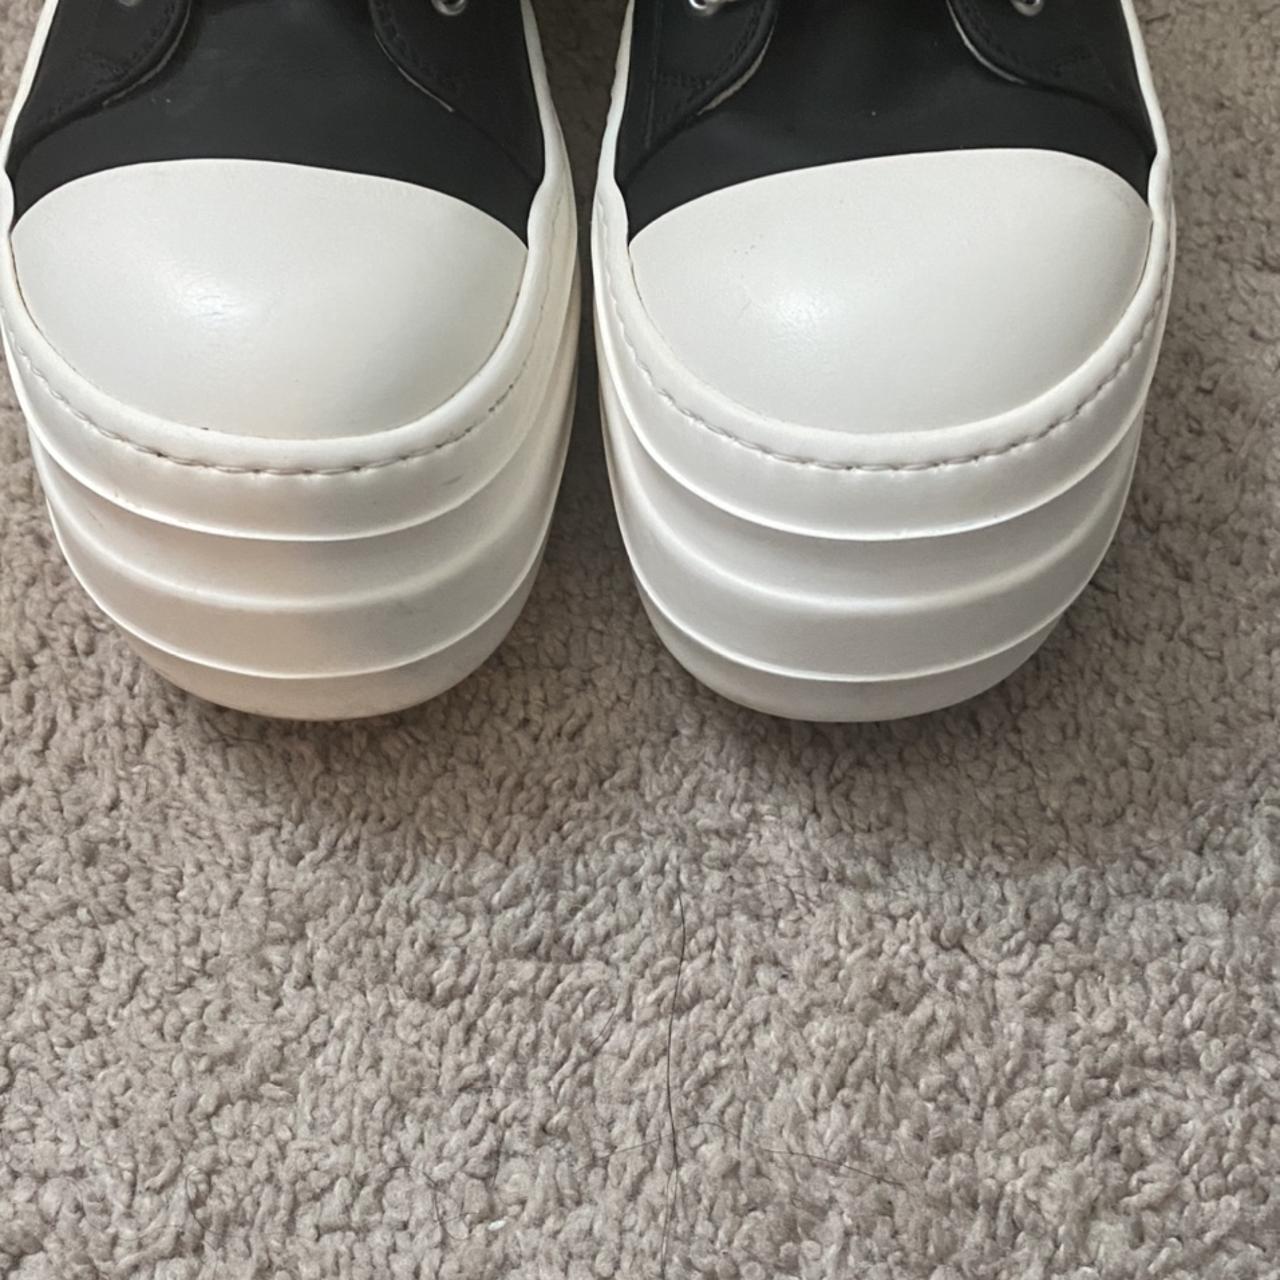 Rick Owens double bumper high top sneakers these are... - Depop